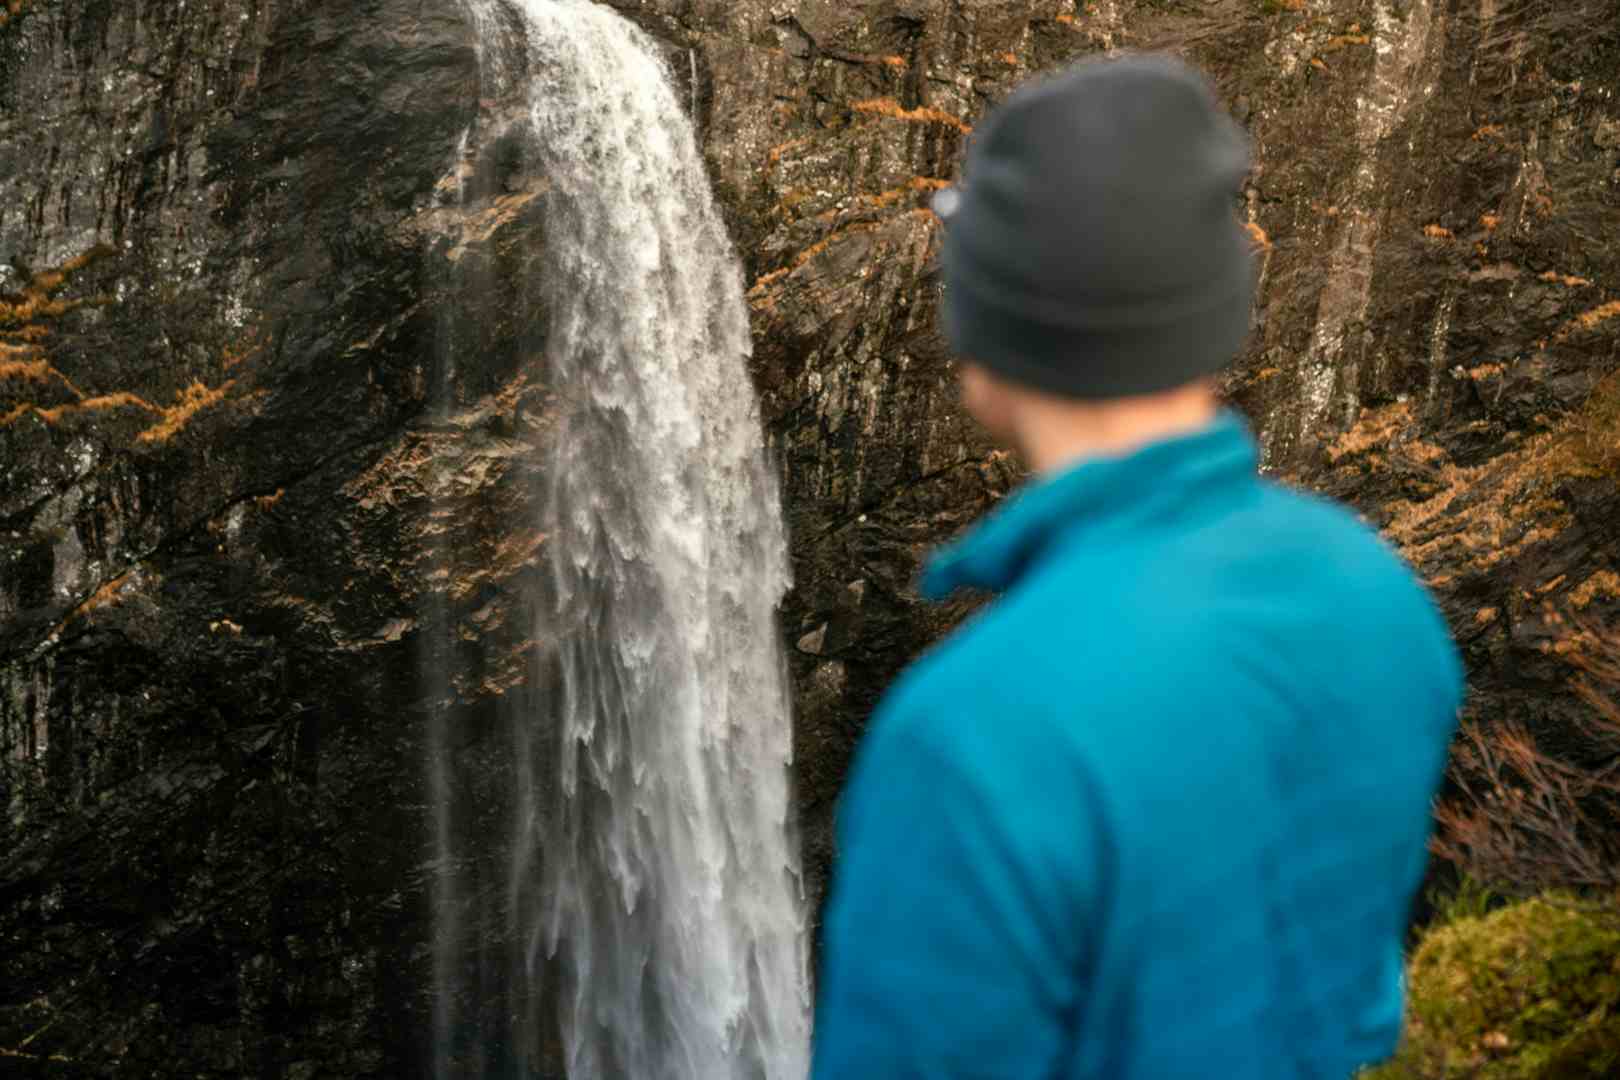 Man watching a waterfall in scenic surroundings in Norway